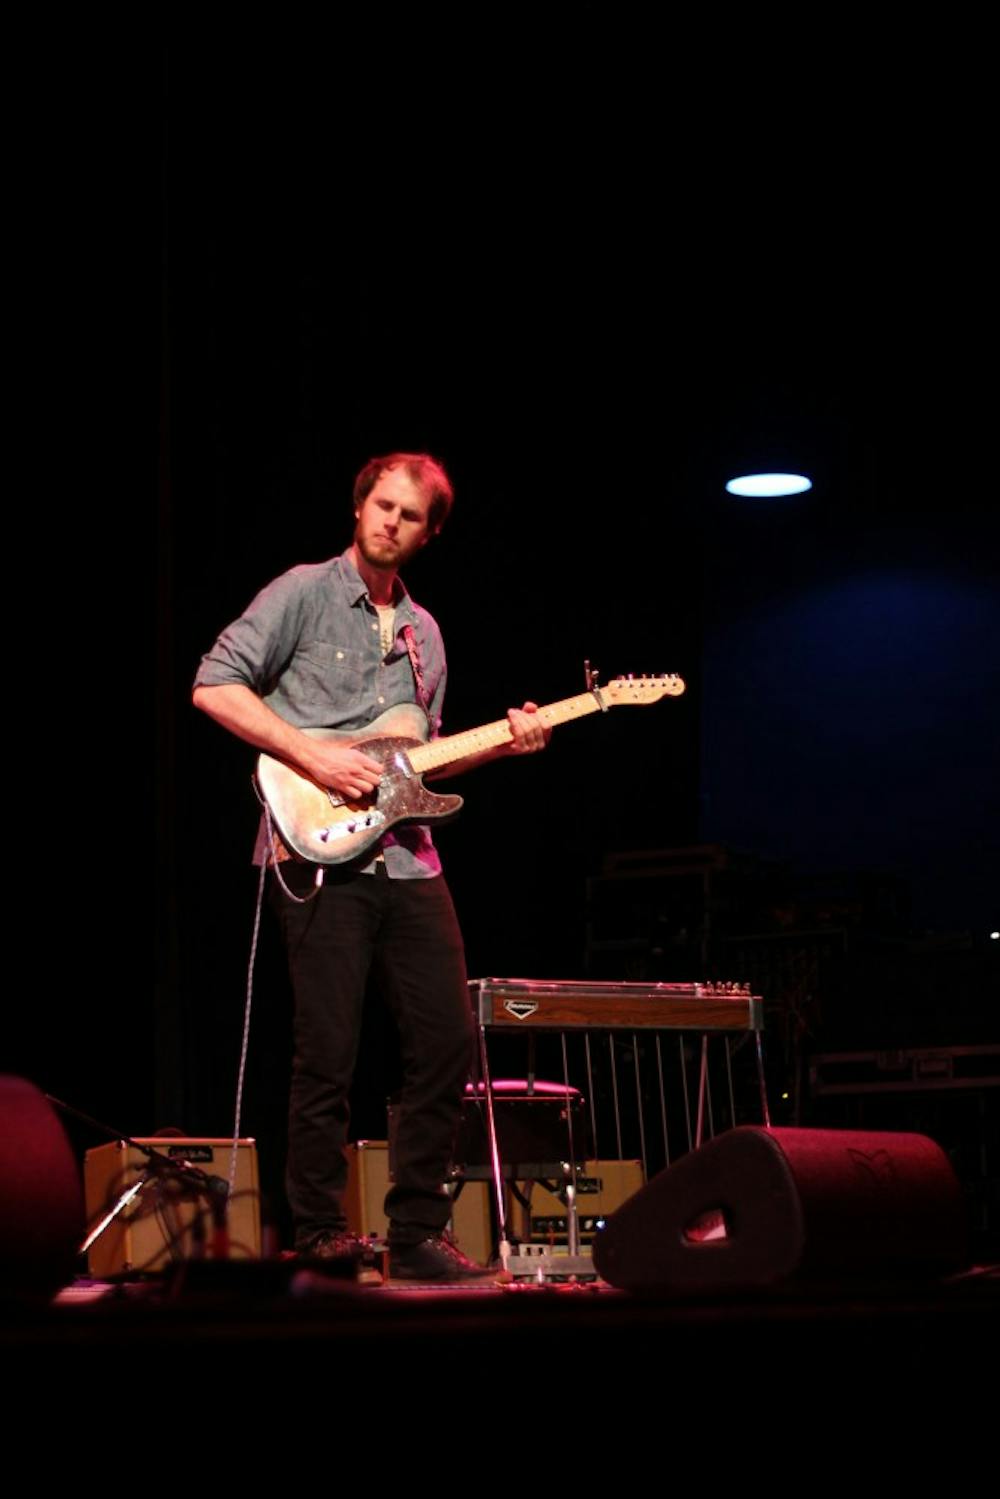 	<p>Jenks Miller of Mount Moriah performs at the Fletcher Opera Theater as part of the 2013 Hopscotch Music Festival.</p>